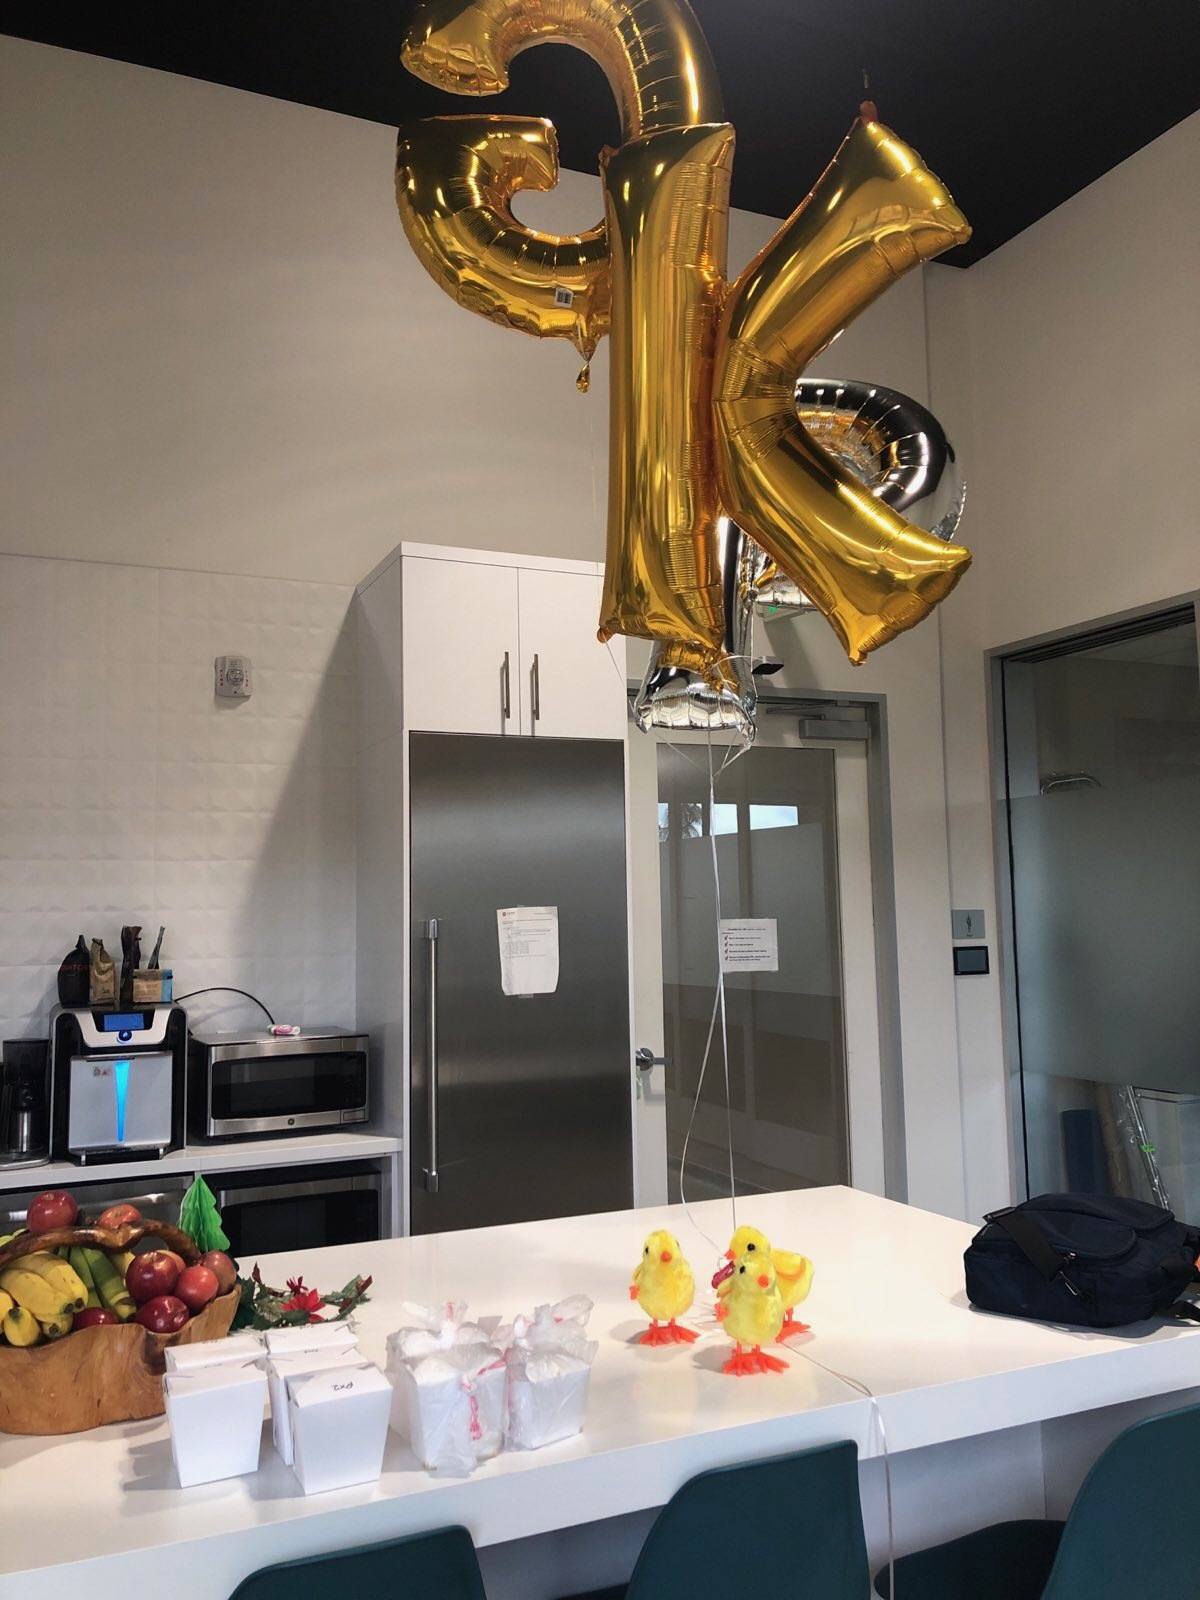 An April 9 photo posted to Upside Foods' company Slack, obtained by The Counter and shown above, demonstrated how a members of the Blue Sky team hoped their accomplishments would be received: with Thai food and celebratory balloons. A few weeks later, everyone on the team haAn April 9 photo posted to Upside Foods' company Slack, obtained by The Counter and shown above, demonstrated how a members of the Blue Sky team hoped their accomplishments would be received: with Thai food and celebratory balloons. A few weeks later, everyone on the team had left the company. d left the company.